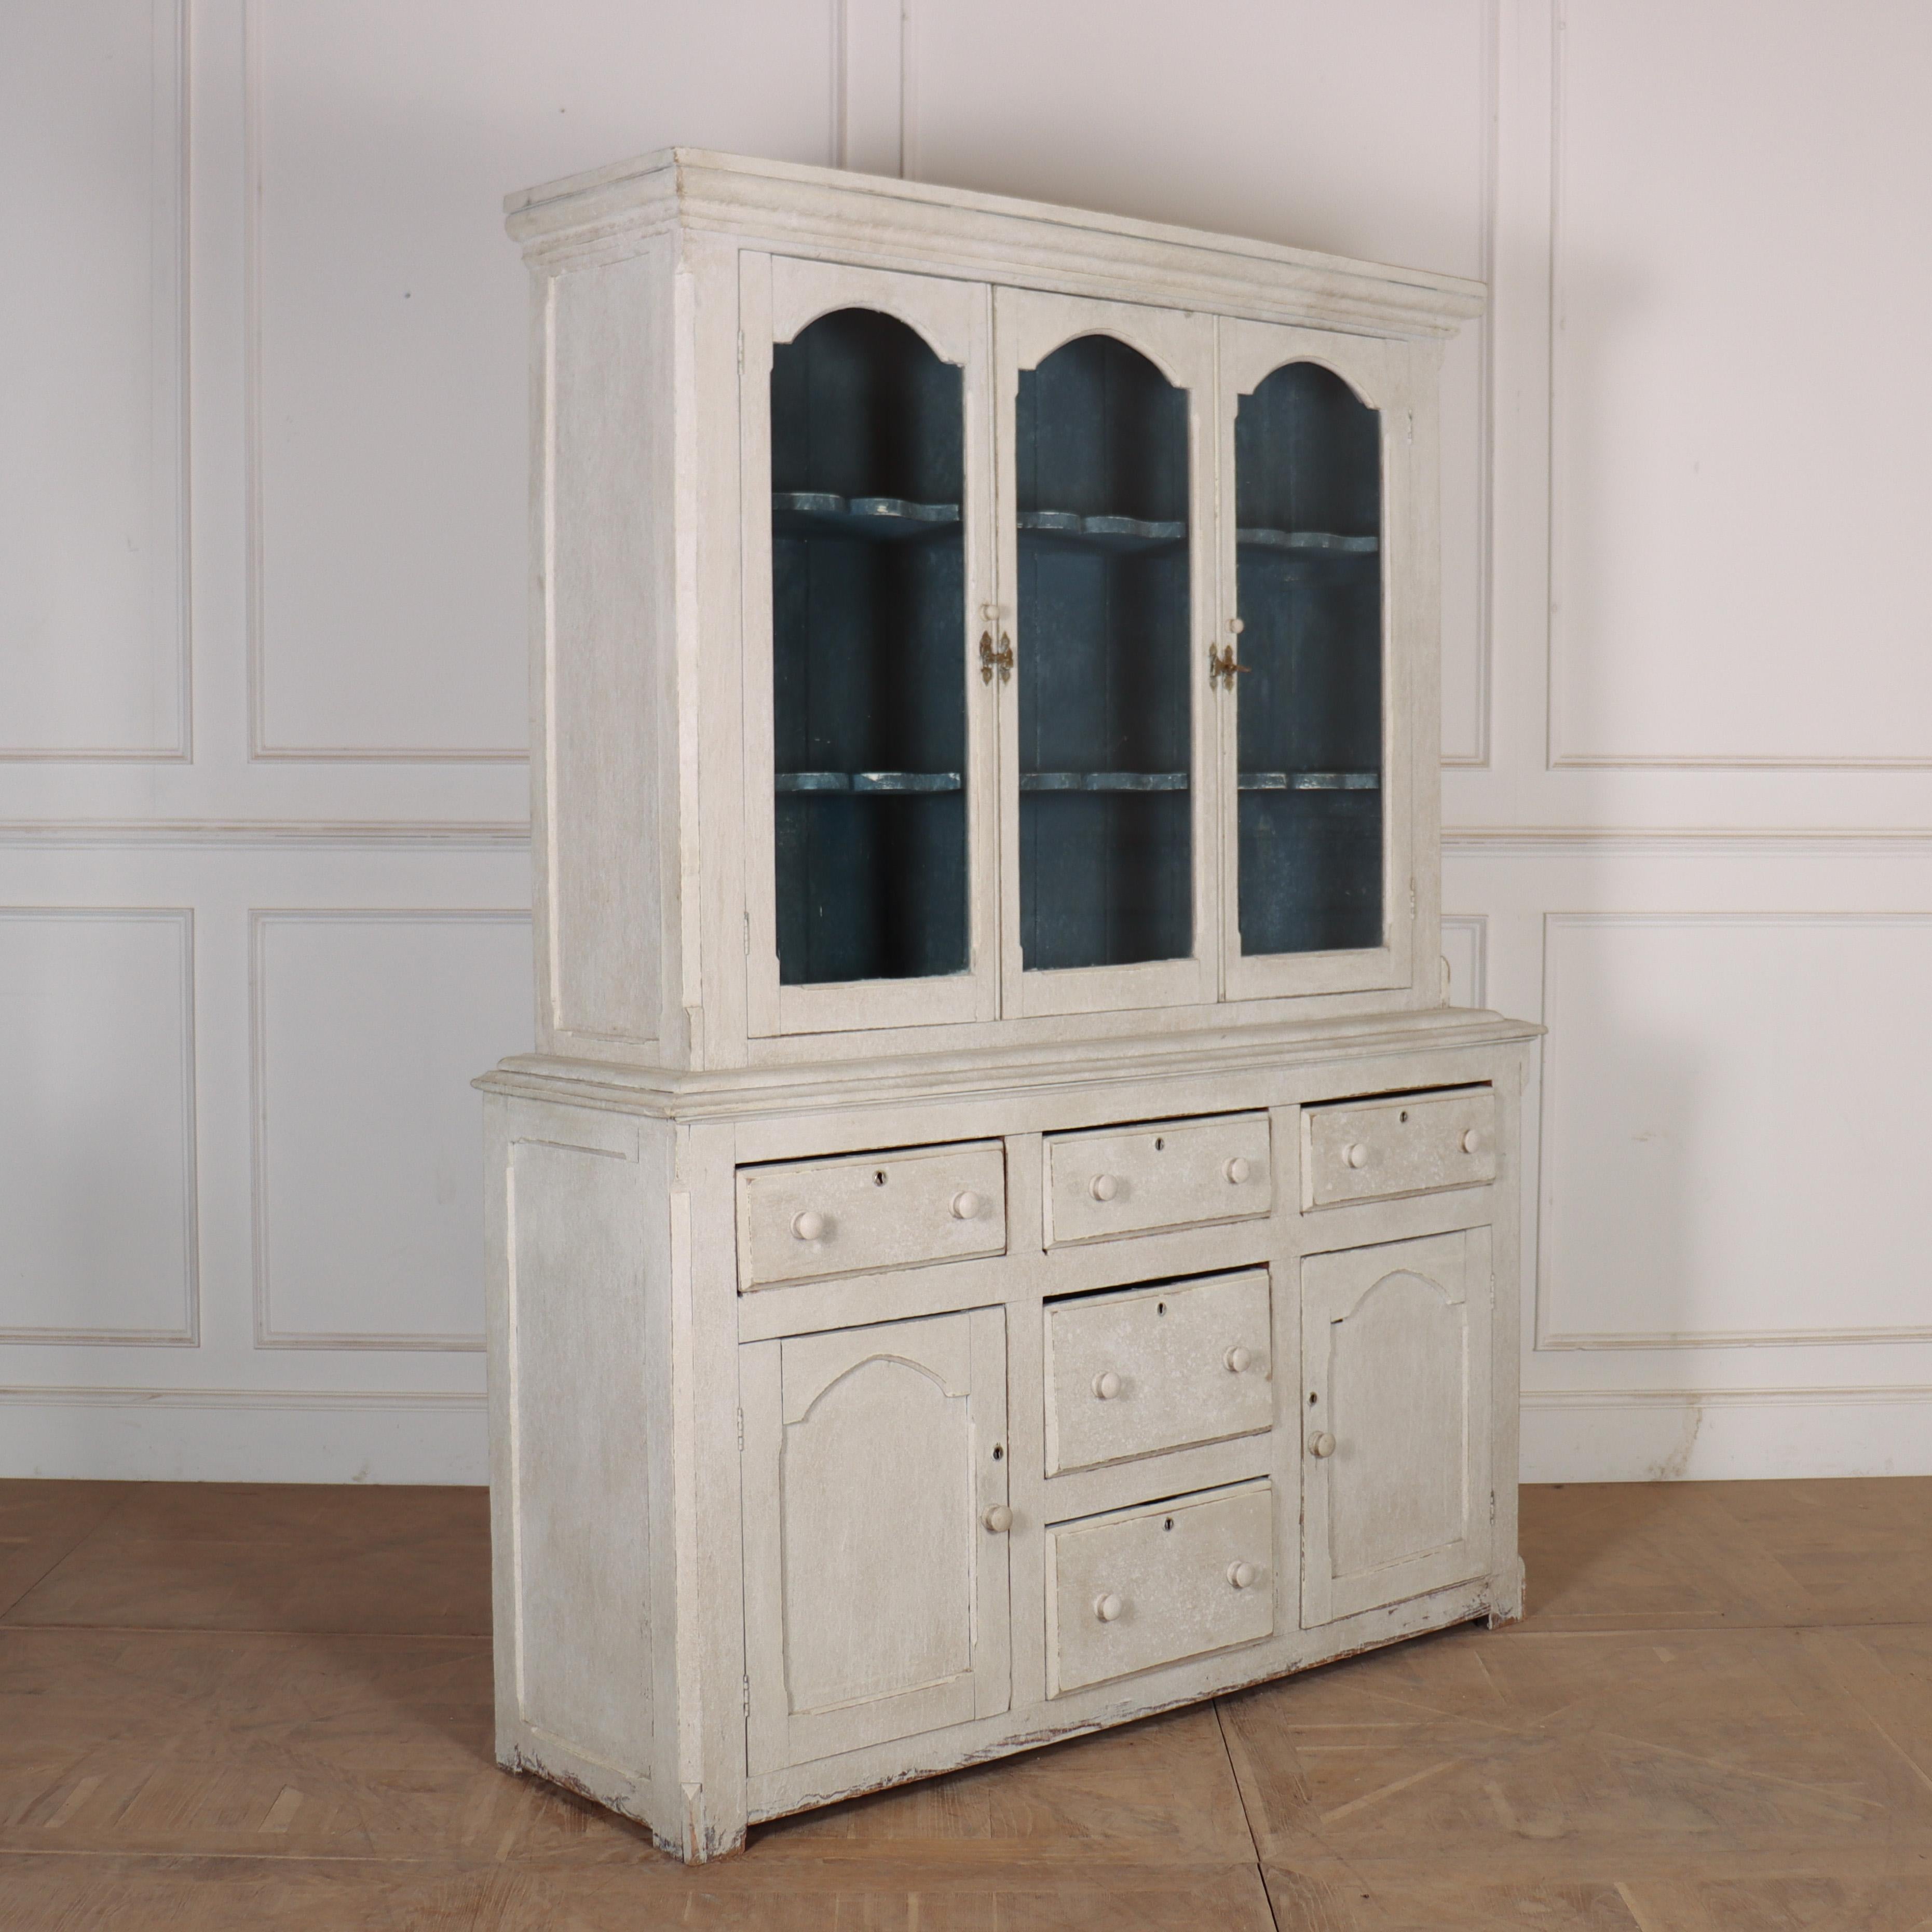 19th century West Country painted pine glazed dresser. 1860.

Reference: 7888

Dimensions
63.5 inches (161 cms) Wide
18.5 inches (47 cms) Deep
81.5 inches (207 cms) High